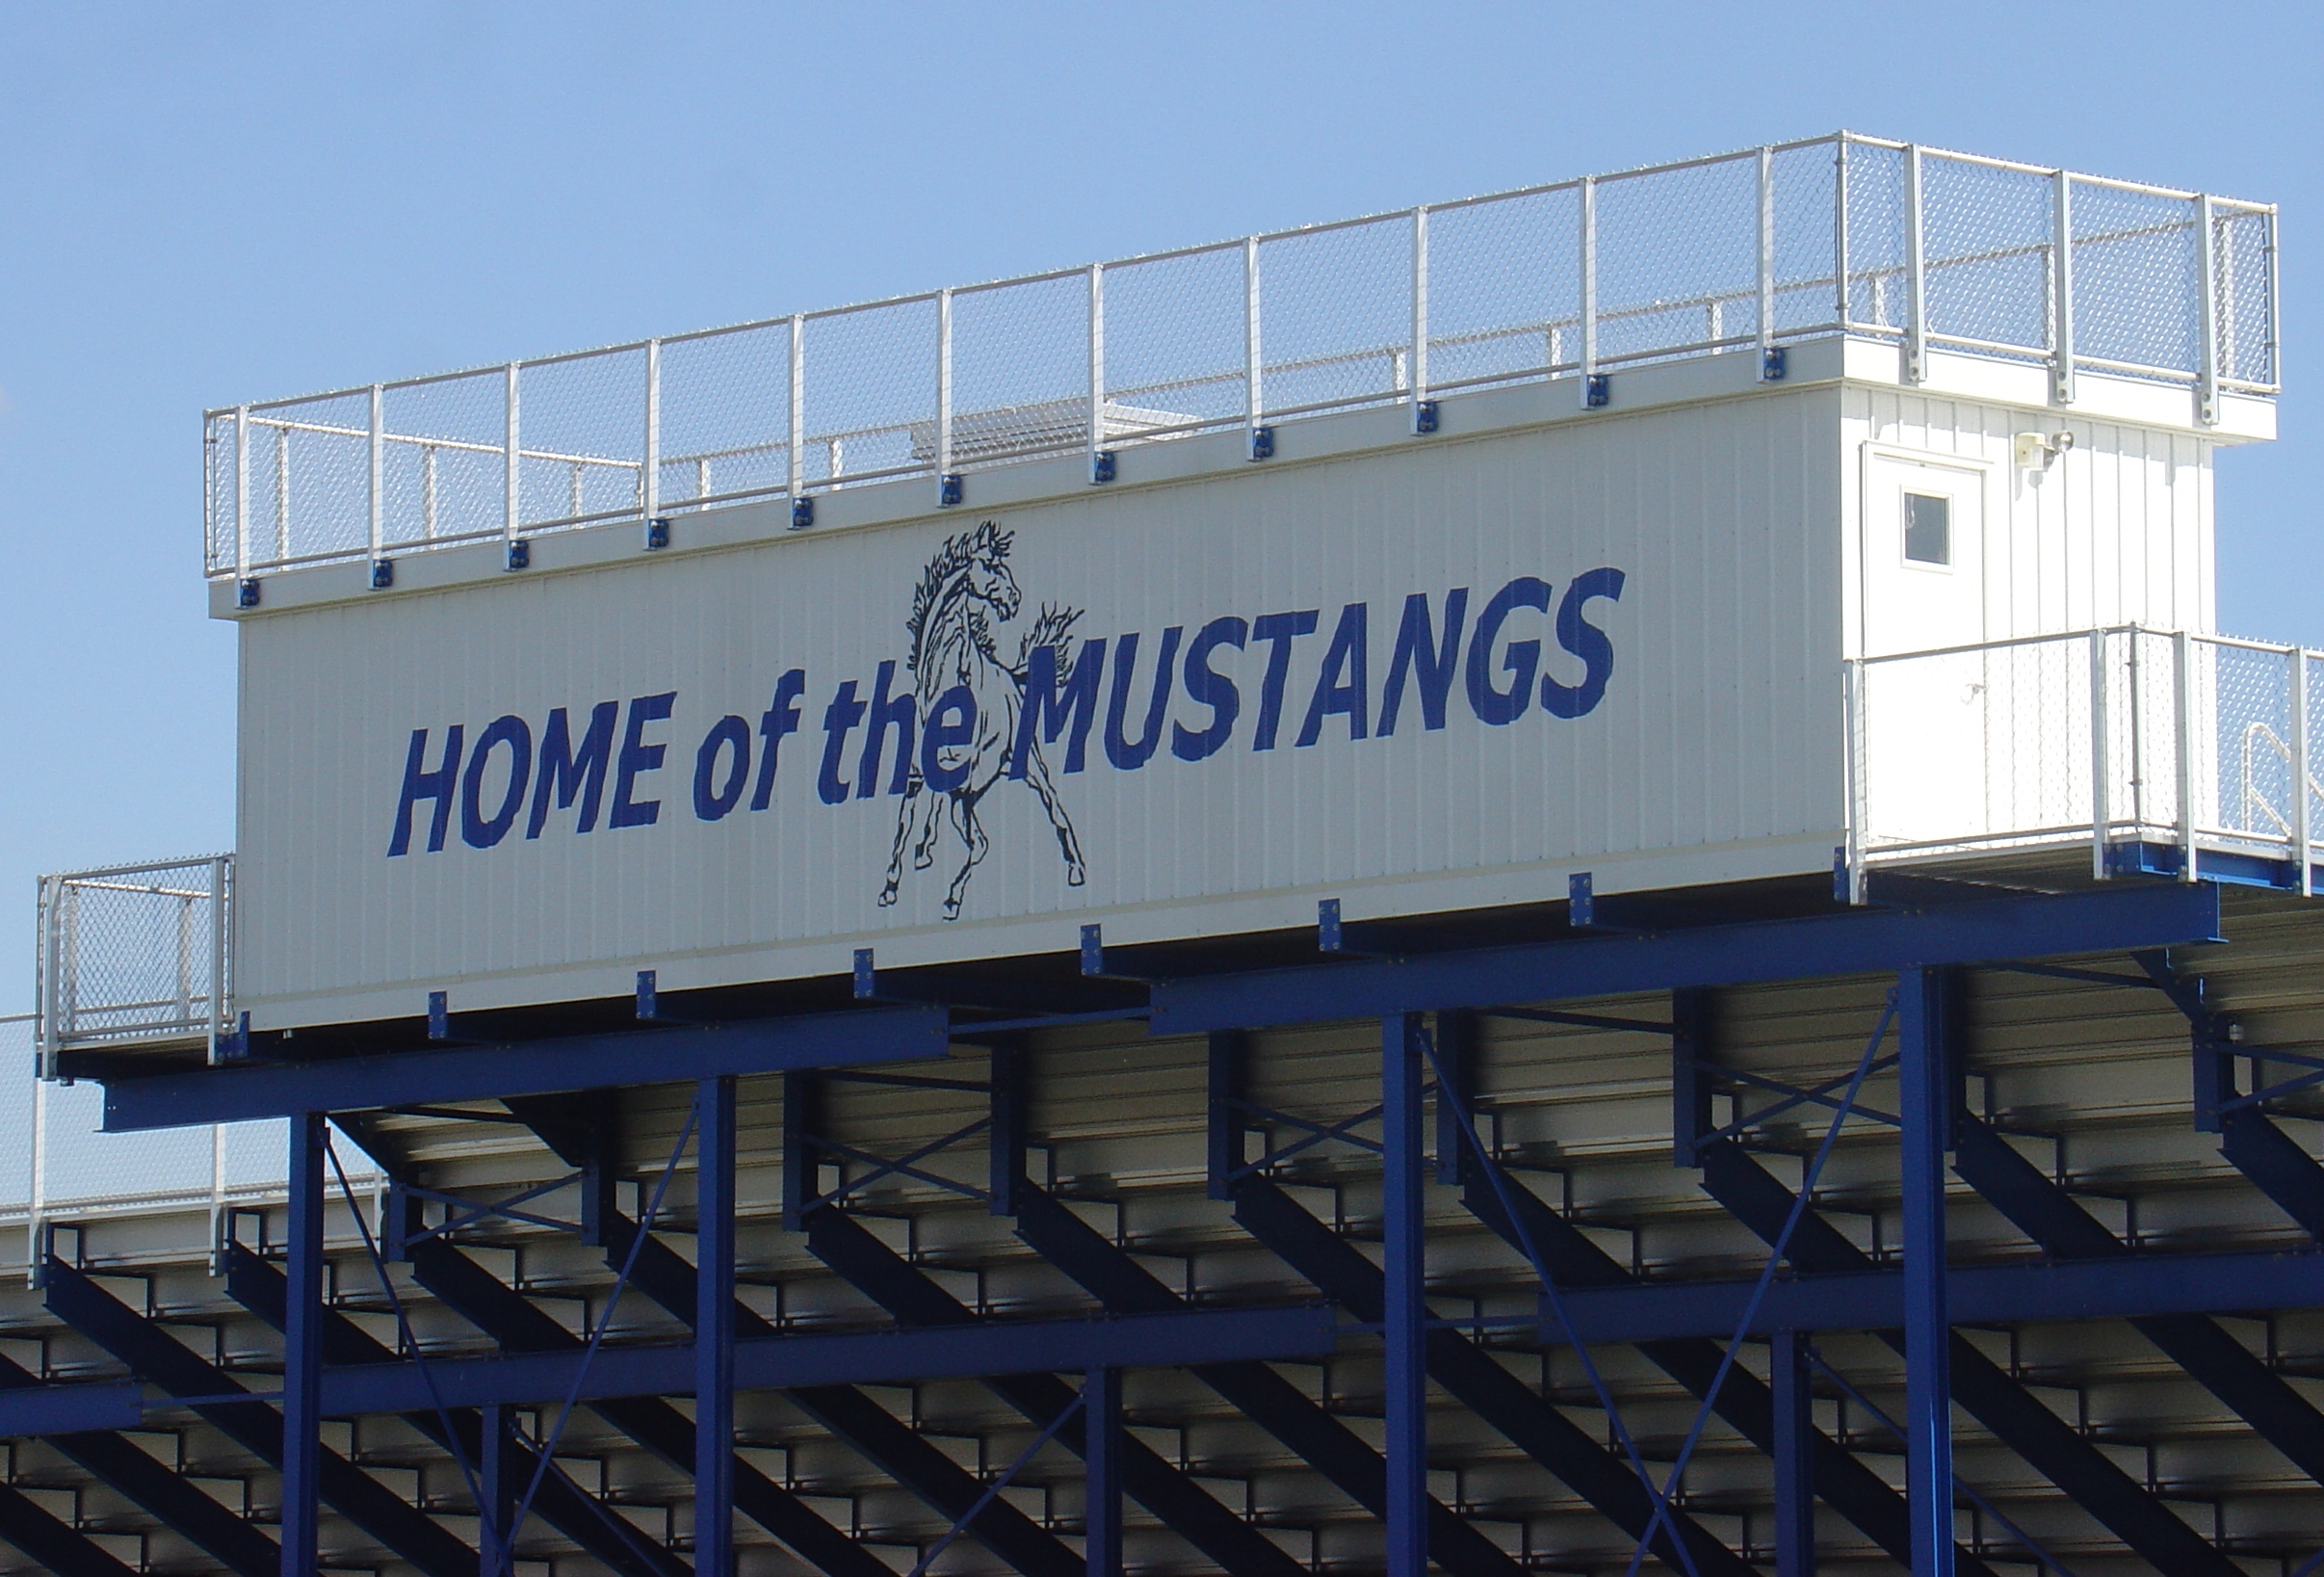 Home of the Mustangs